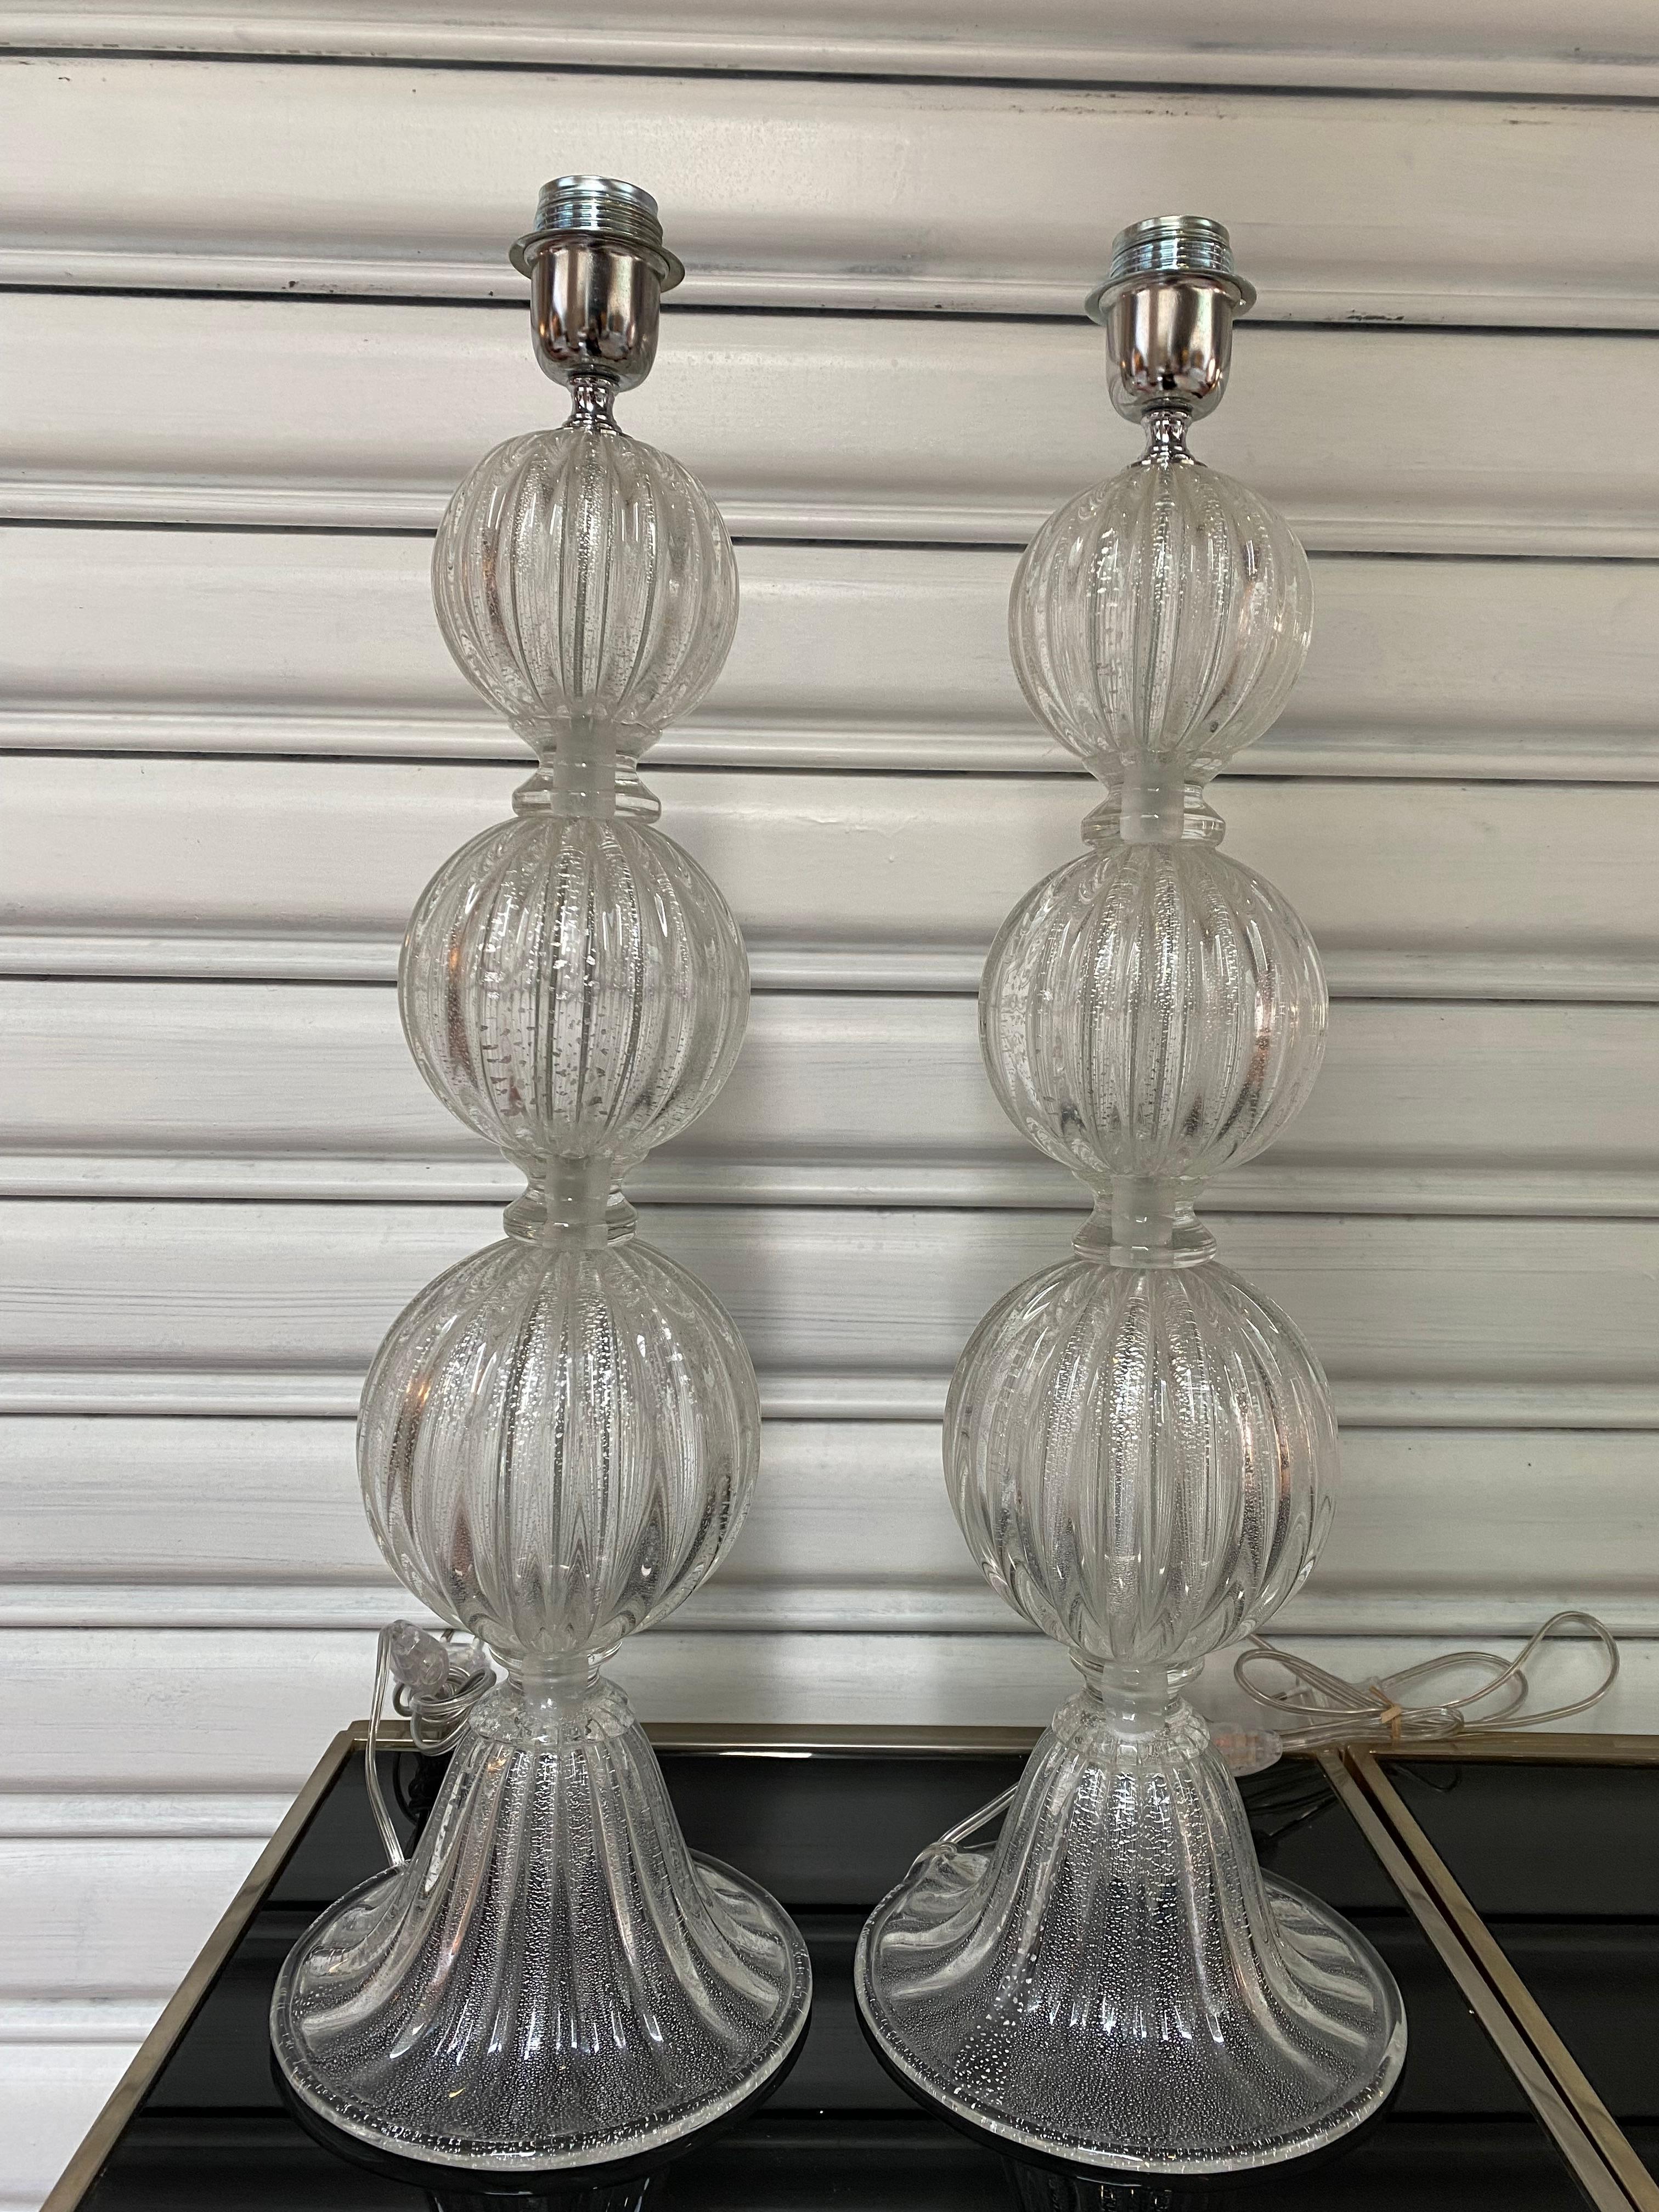 Pair of transparent lamps Alberto Dona Murano (1 and 2 )
Circa 1970
Signed on the foot 
Dimensions : H 62 x 18.5cm
Ref : c/1928/2
Price :3500 € for the pair.
 